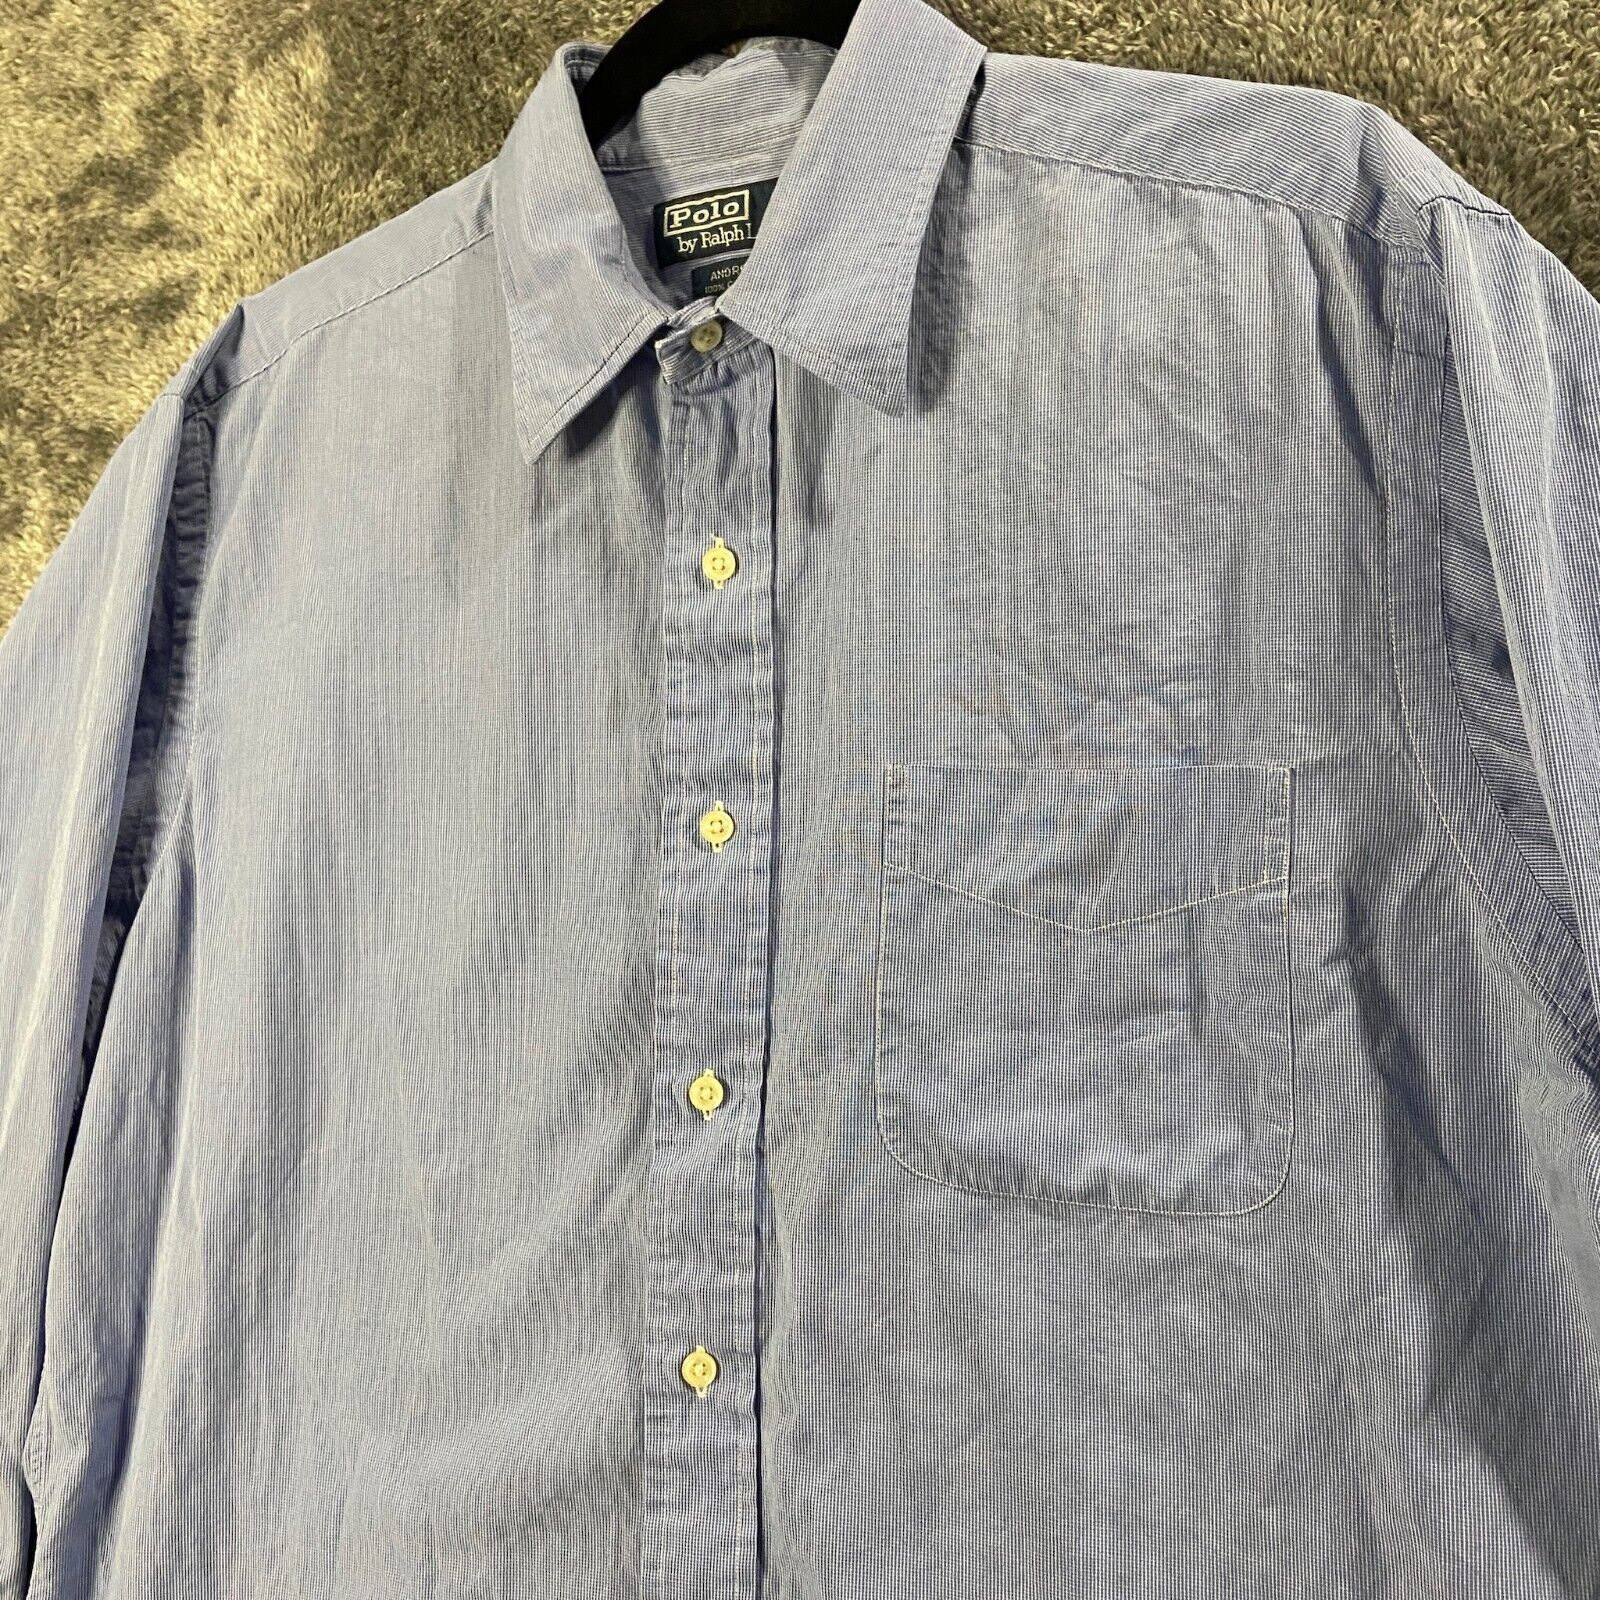 Primary image for Polo Ralph Lauren Dress Shirt Mens 16 - 34 Blue Andrew Button Up Preppy Pocket